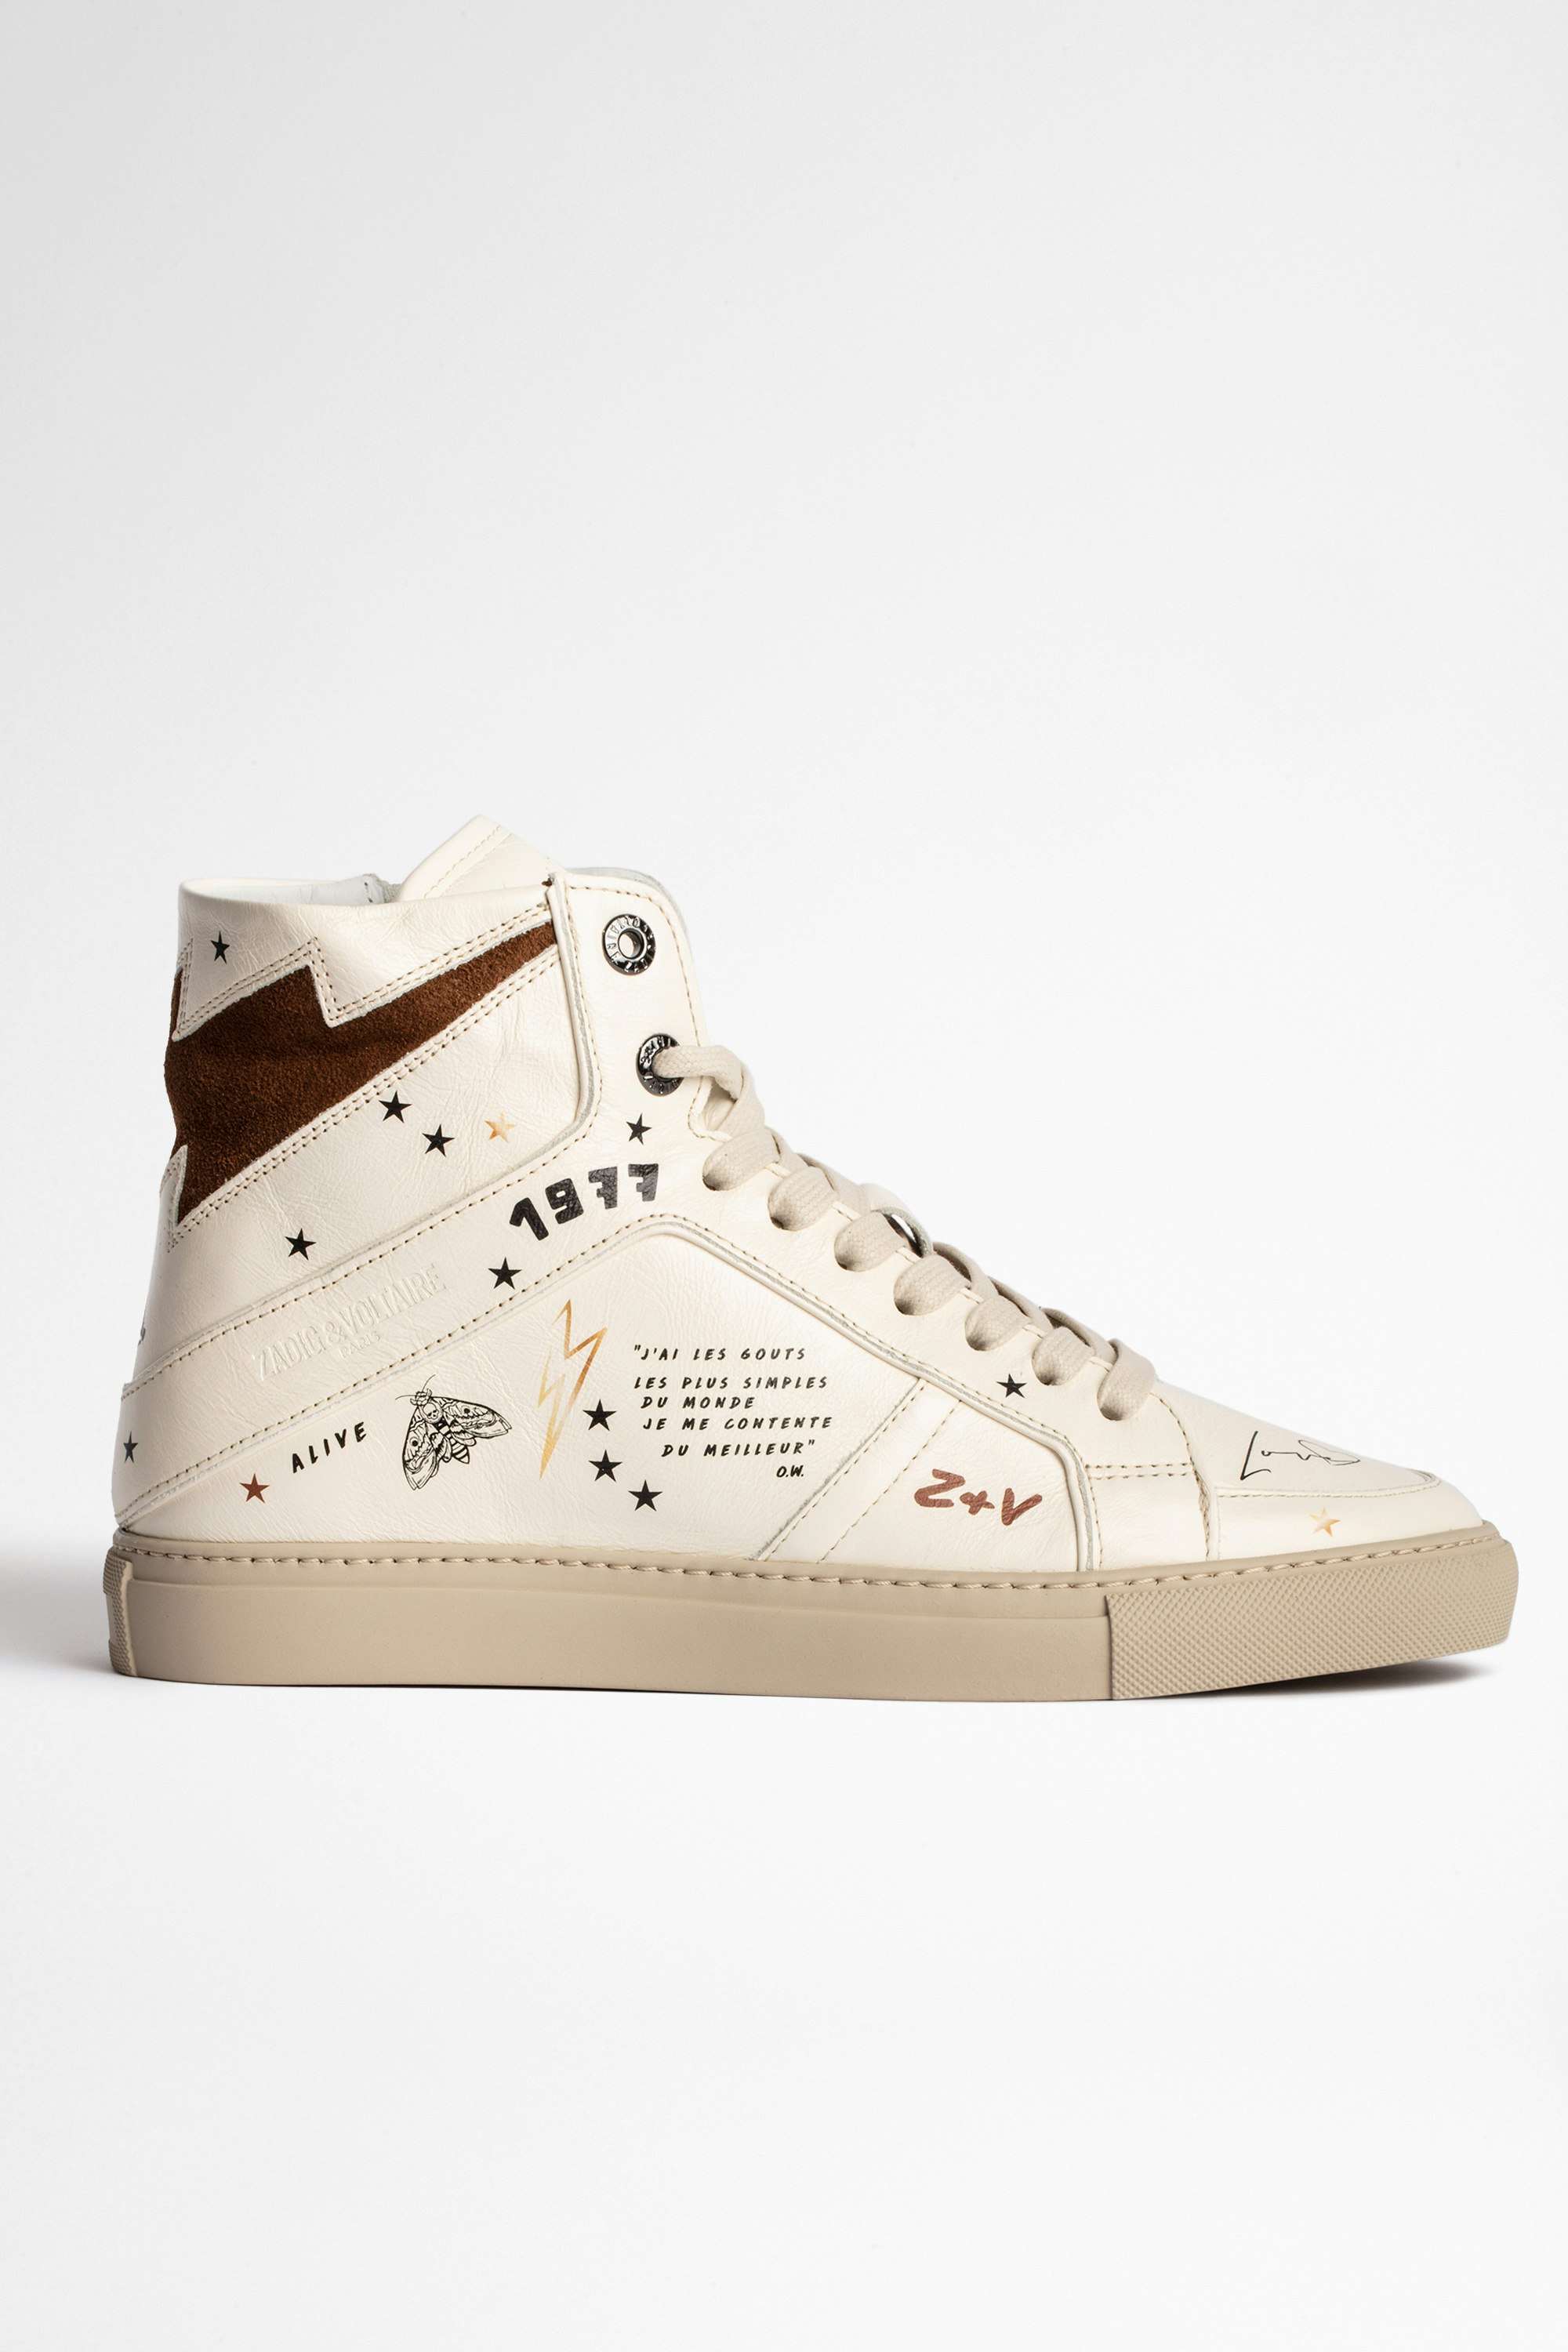 ZV1747 High Flash Crush レザースニーカー Women’s high-top sneakers in smooth white leather with screen-printed symbols